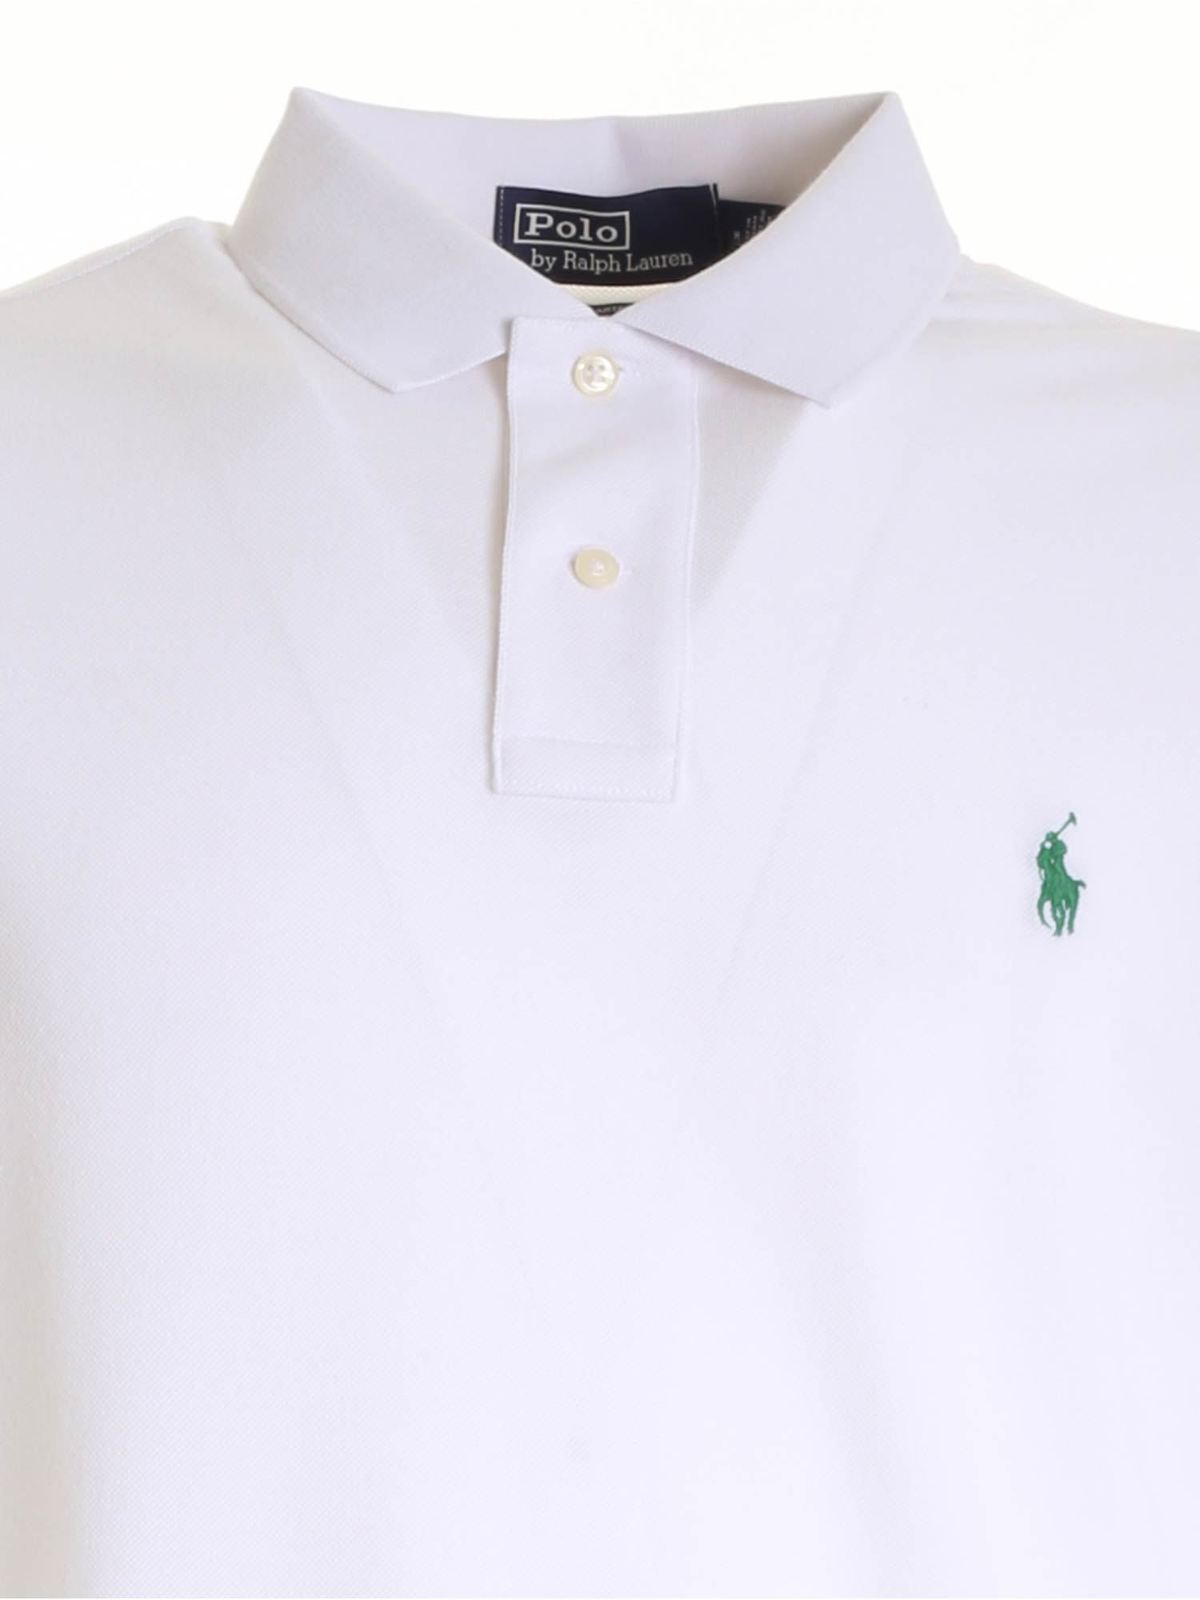 green and white polo shirt